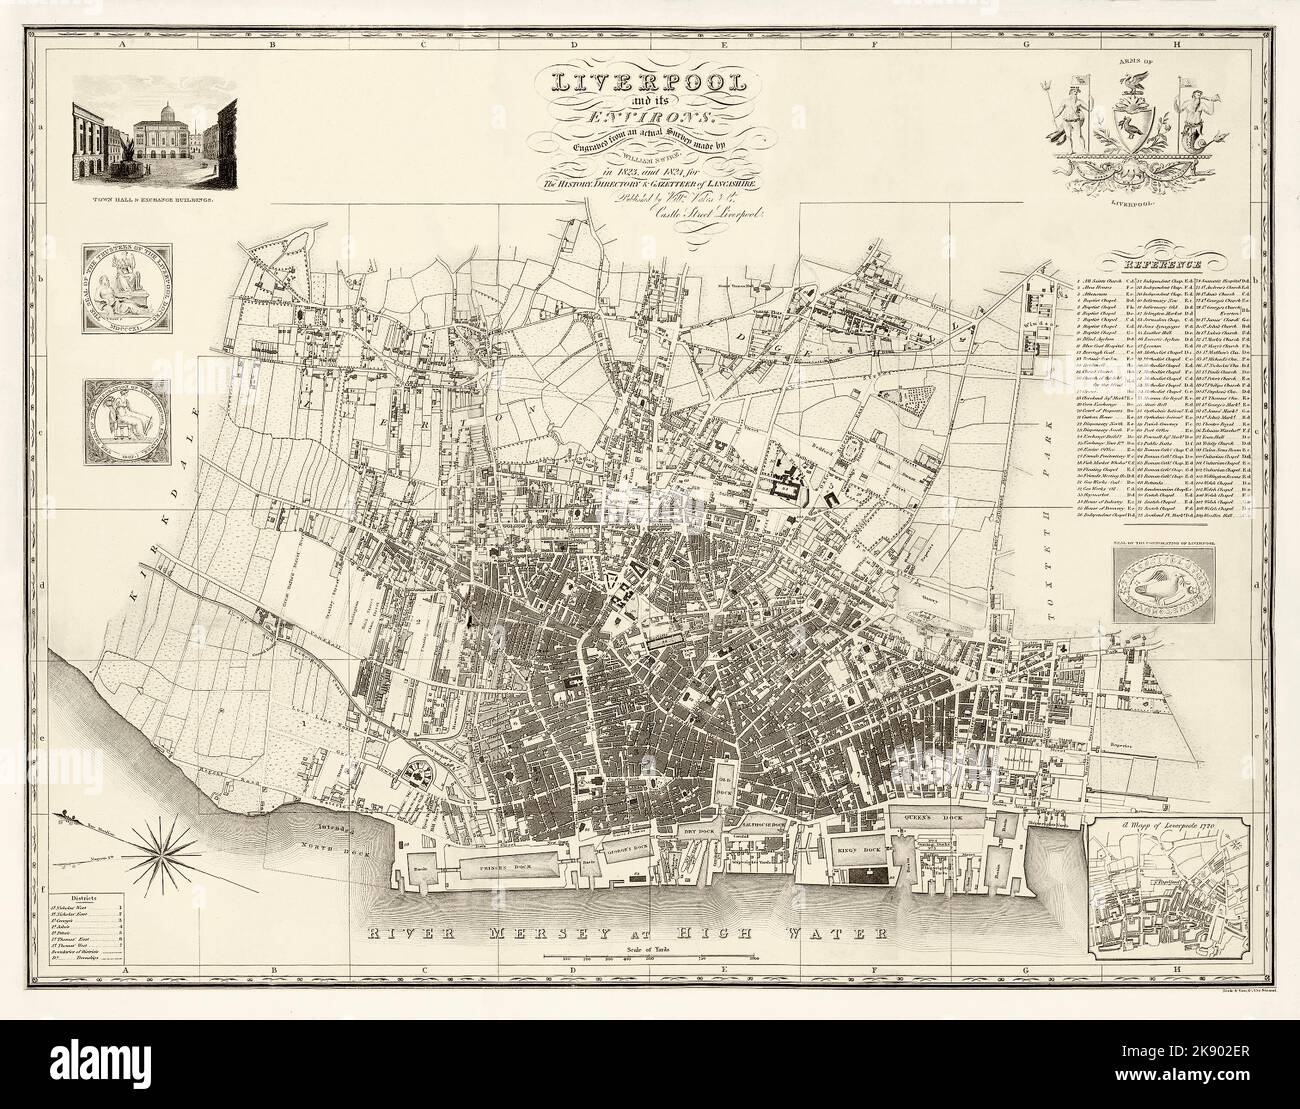 A map by William Swire of Liverpool created in 1824 as the city moved into the 19th century featuring a list of districts and landmarks. The docks stretch from Queens Dock in the south to the North Dock that became Waterloo Dock in 1834. Everton was a village of large houses and gardens for wealthy merchants and industrialists and clean air and views over the river. The map includes the Corporation of Liverpool coat-of-arms with a depiction of the liver bird. Bottom right features ‘A Mapp of Leverpoole 1720’, illustrating the town almost exactly a century earlier. Stock Photo